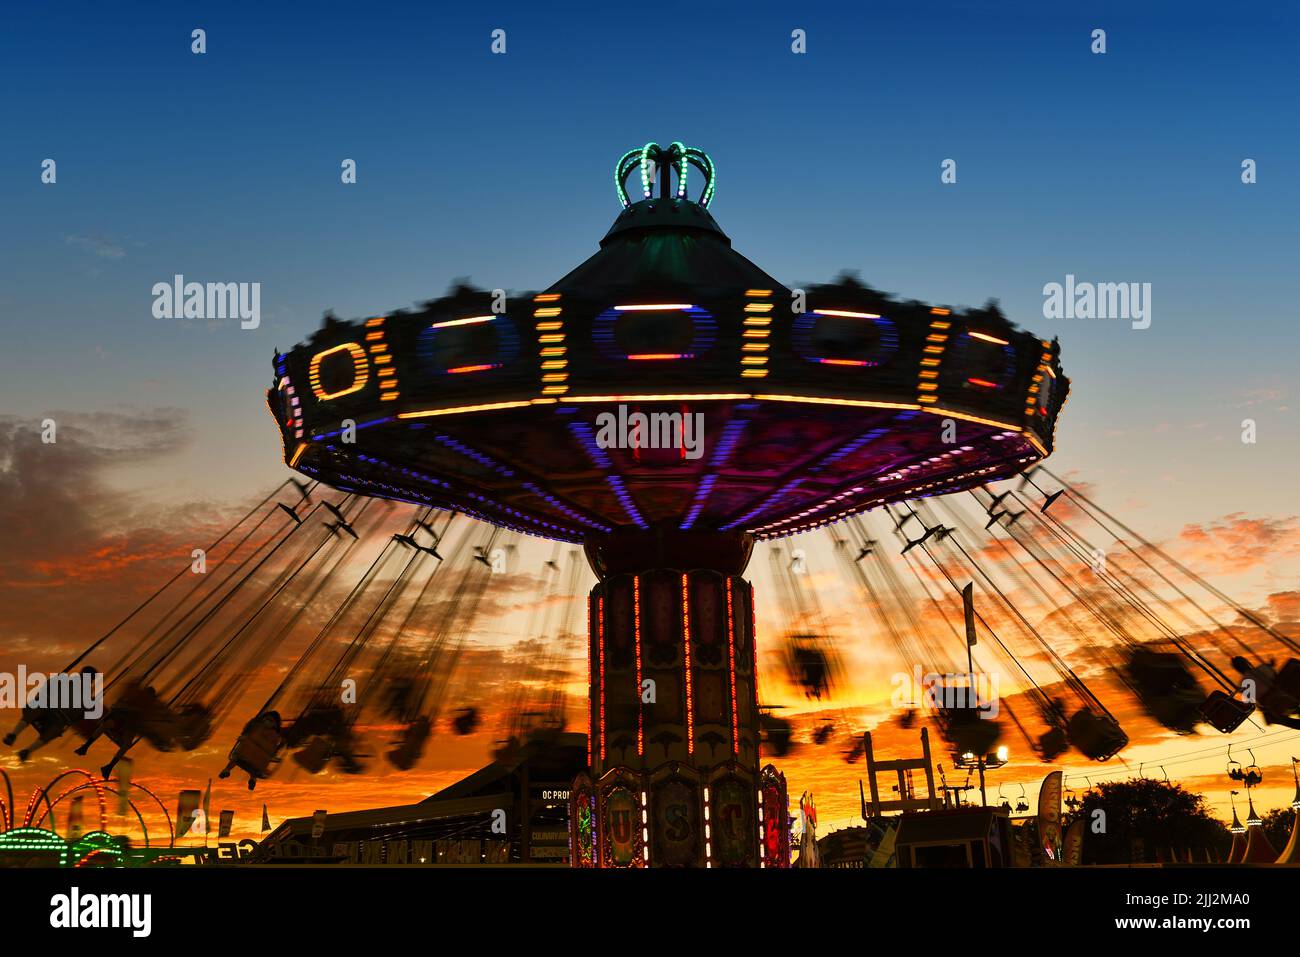 COSTA MESA, CALIFORNIA - 20 JUL 2022: Carnival swing ride with motion blur at the Orange County Fair with a beautiful sunset sky. Stock Photo